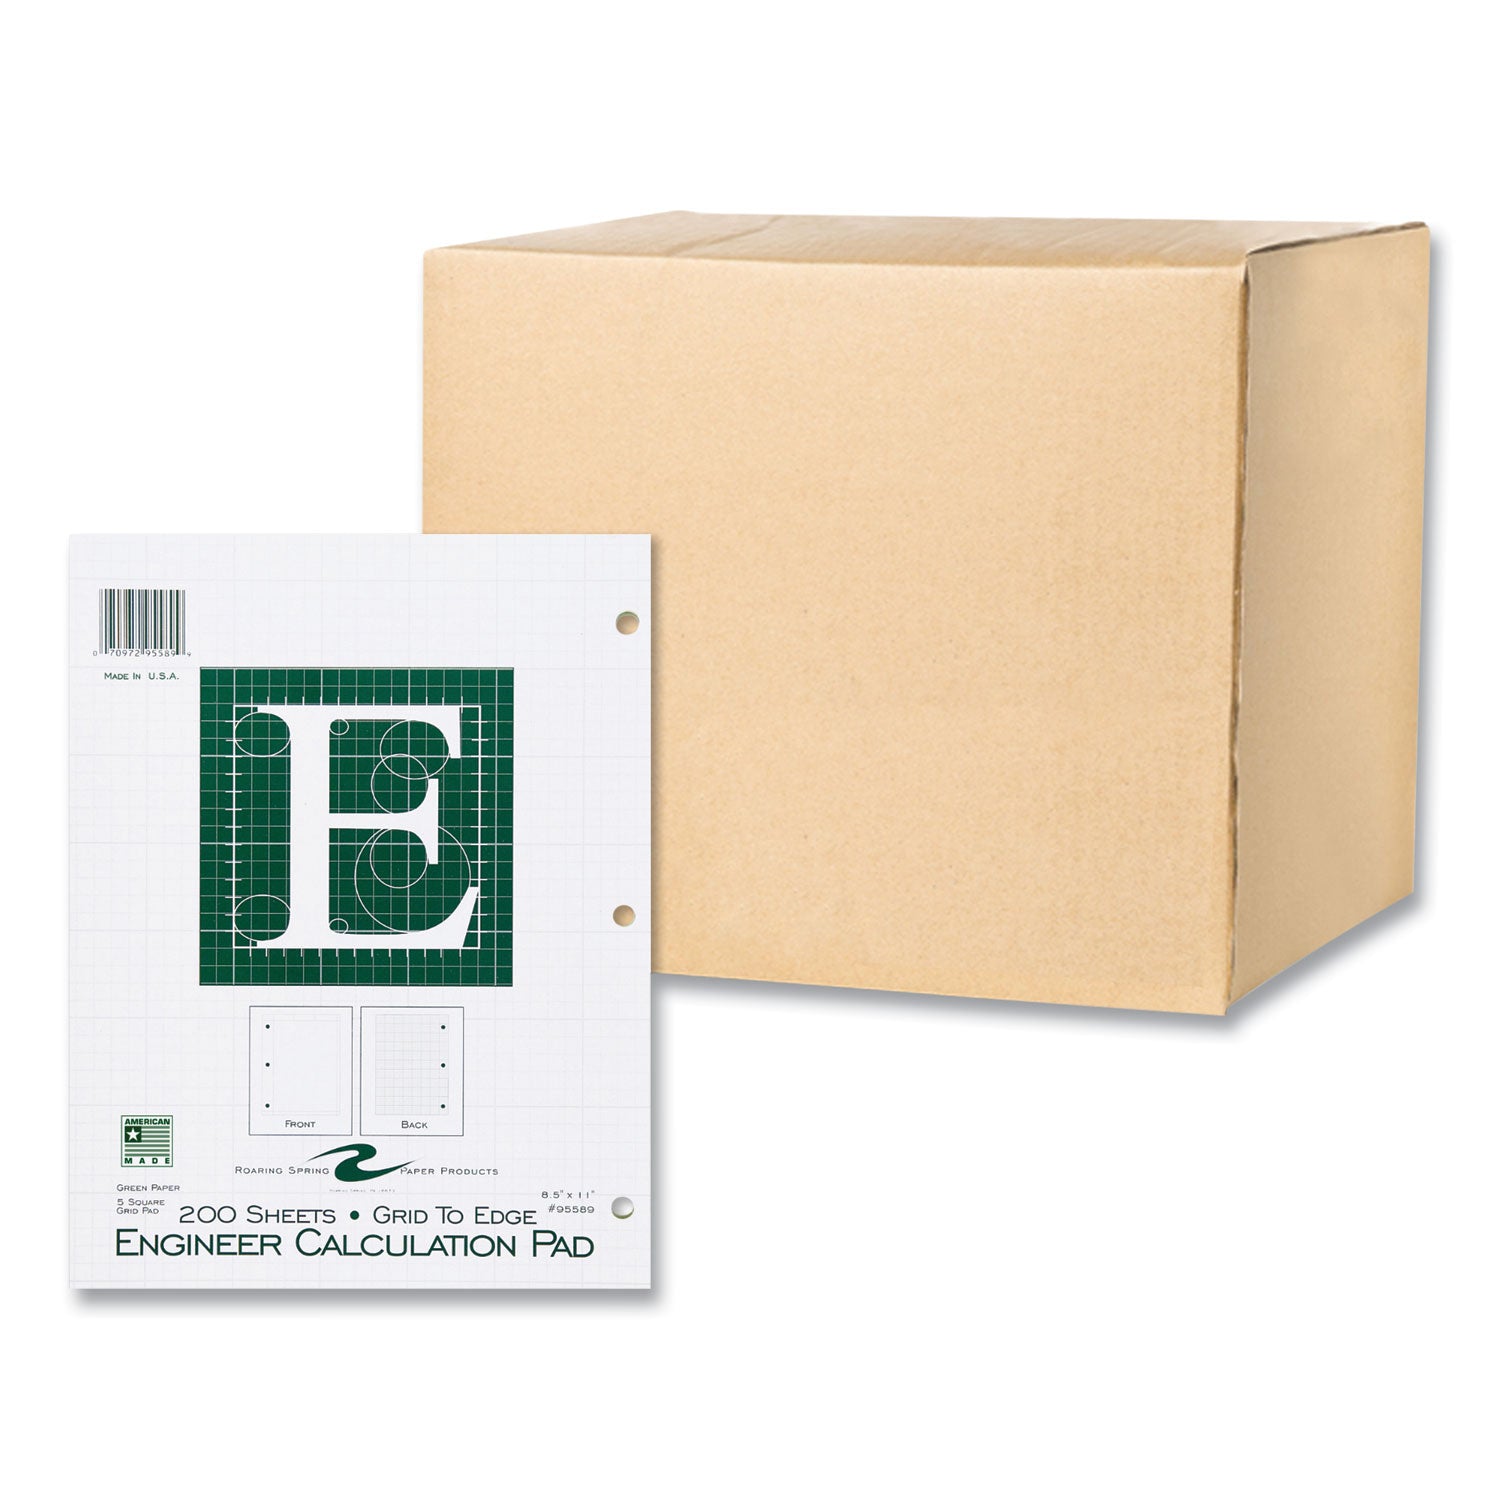 engineer-pad-125-margin-quad-rule-5-sq-in-1-sq-in-200-lt-green-85x11-sheets-pad-12-ct-ships-in-4-6-business-days_roa95589cs - 3